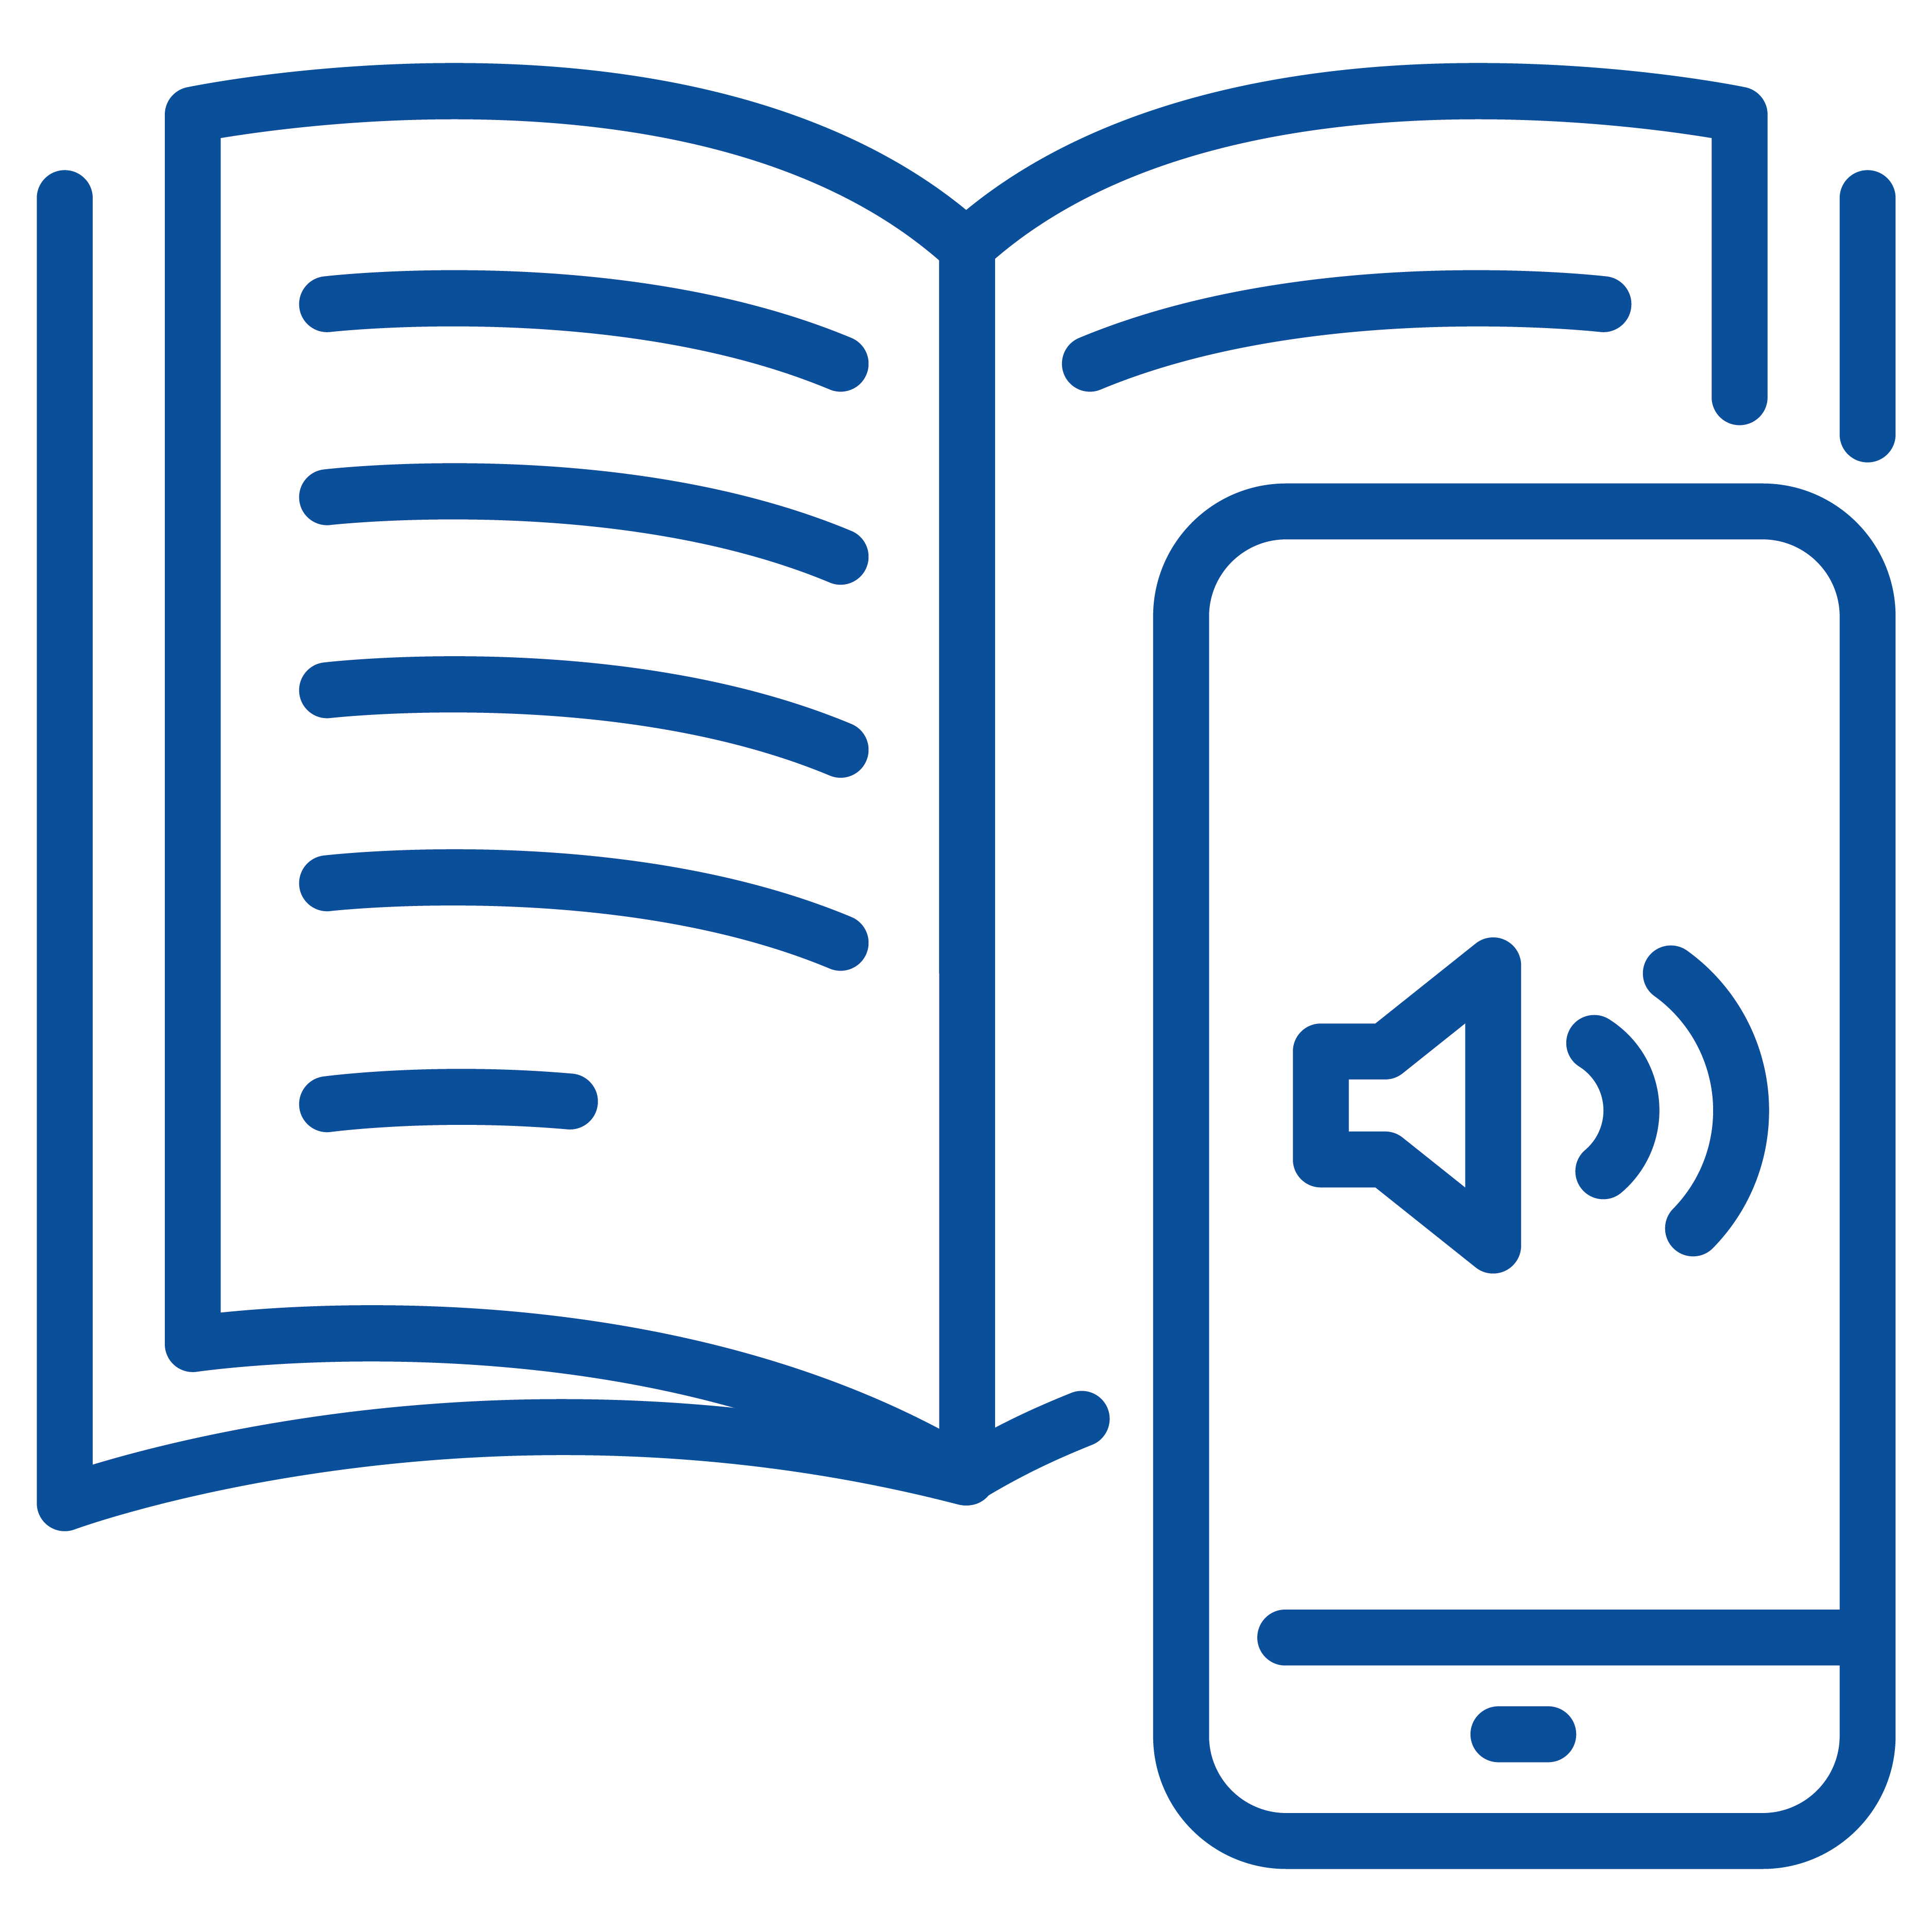 Icon to represent text-to-speech function on a mobile device.